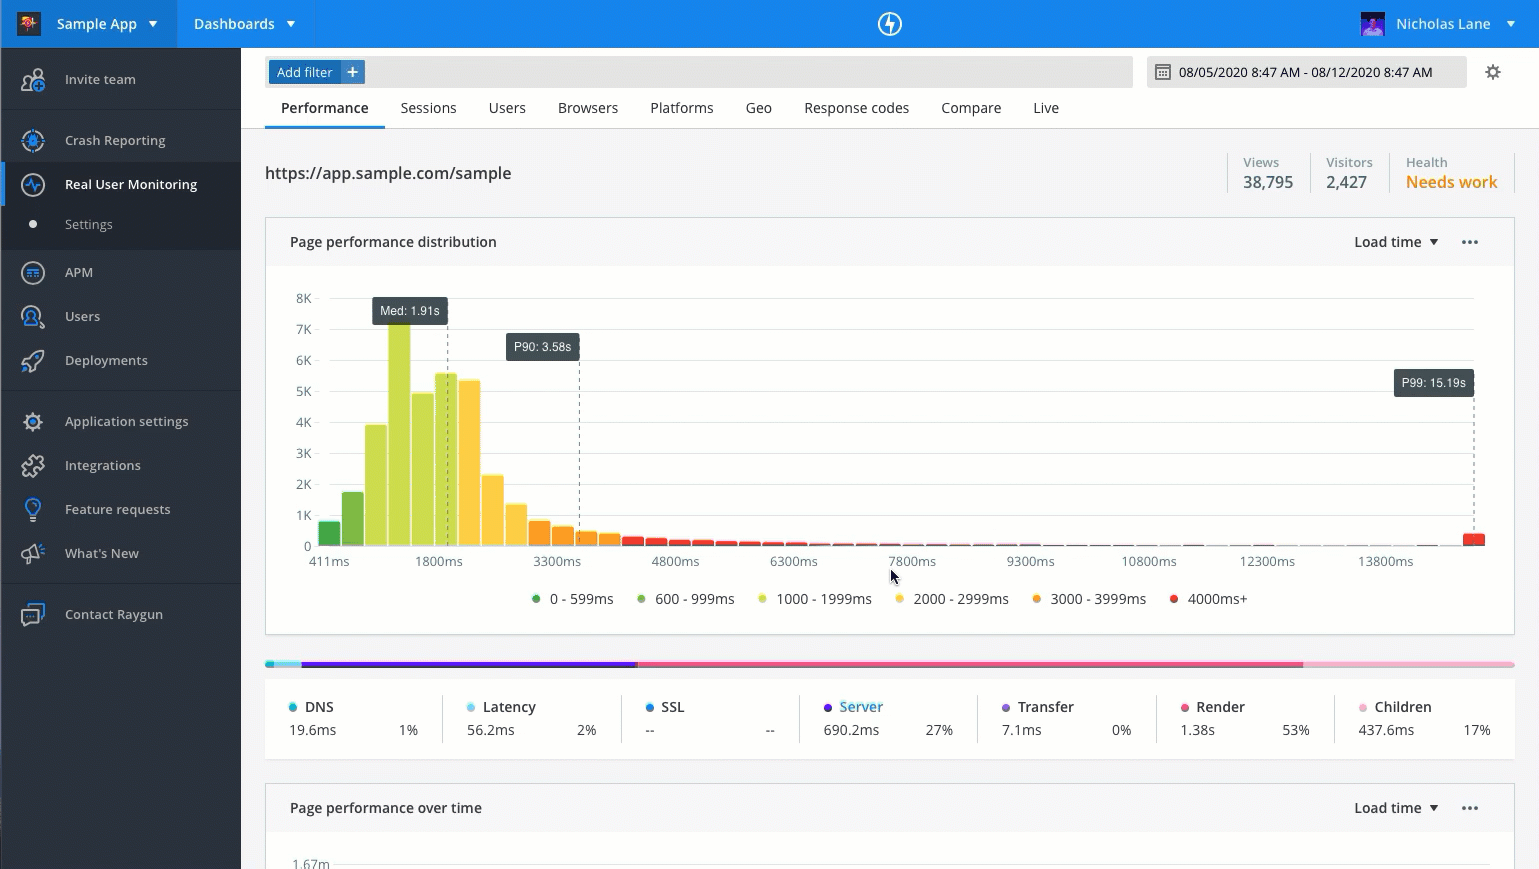 Monitor performance trends over time in Raygun Real User Monitoring